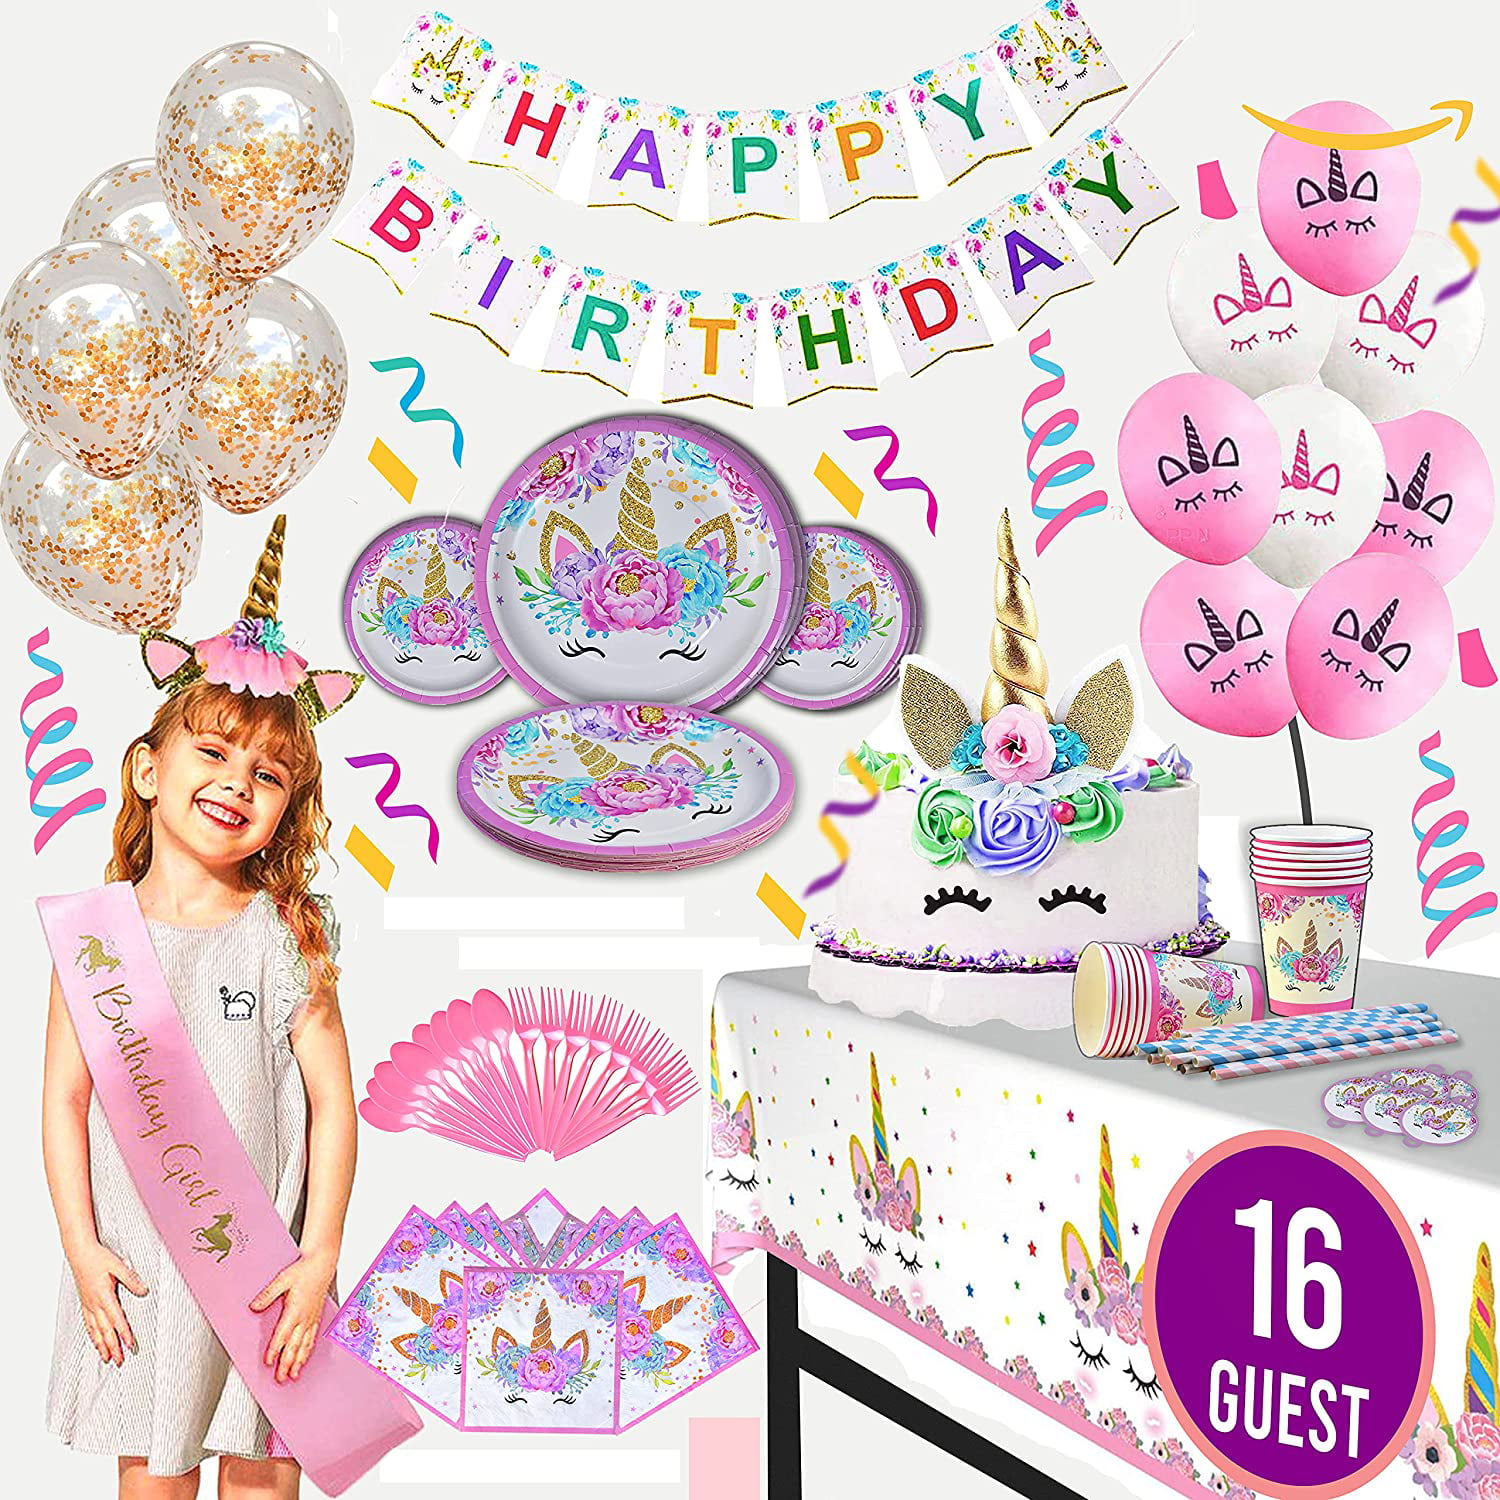 Forks & Spoons Set Dinning & Dessert plates Tablecloth Cups Headband & Sash Unicorn Cake Topper Value Smash Unicorn Party Supplies 16 guests for girls with Birthday Banner 15 balloons 